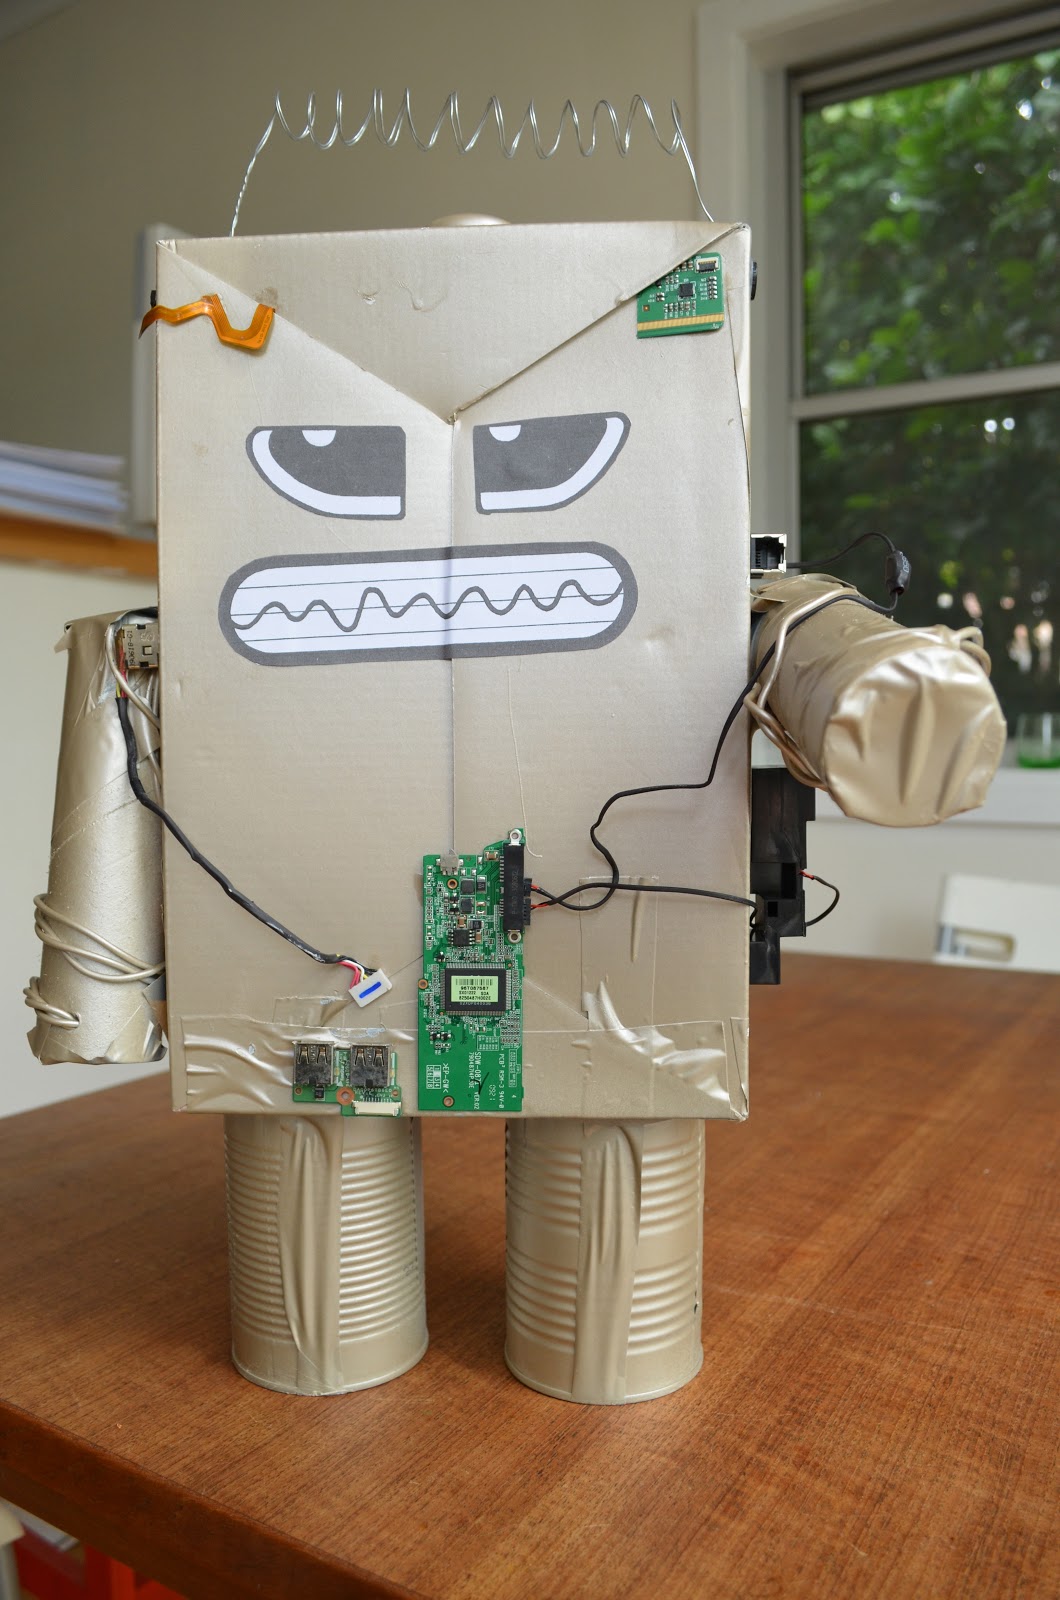 born creations: How to build a robot out of materials